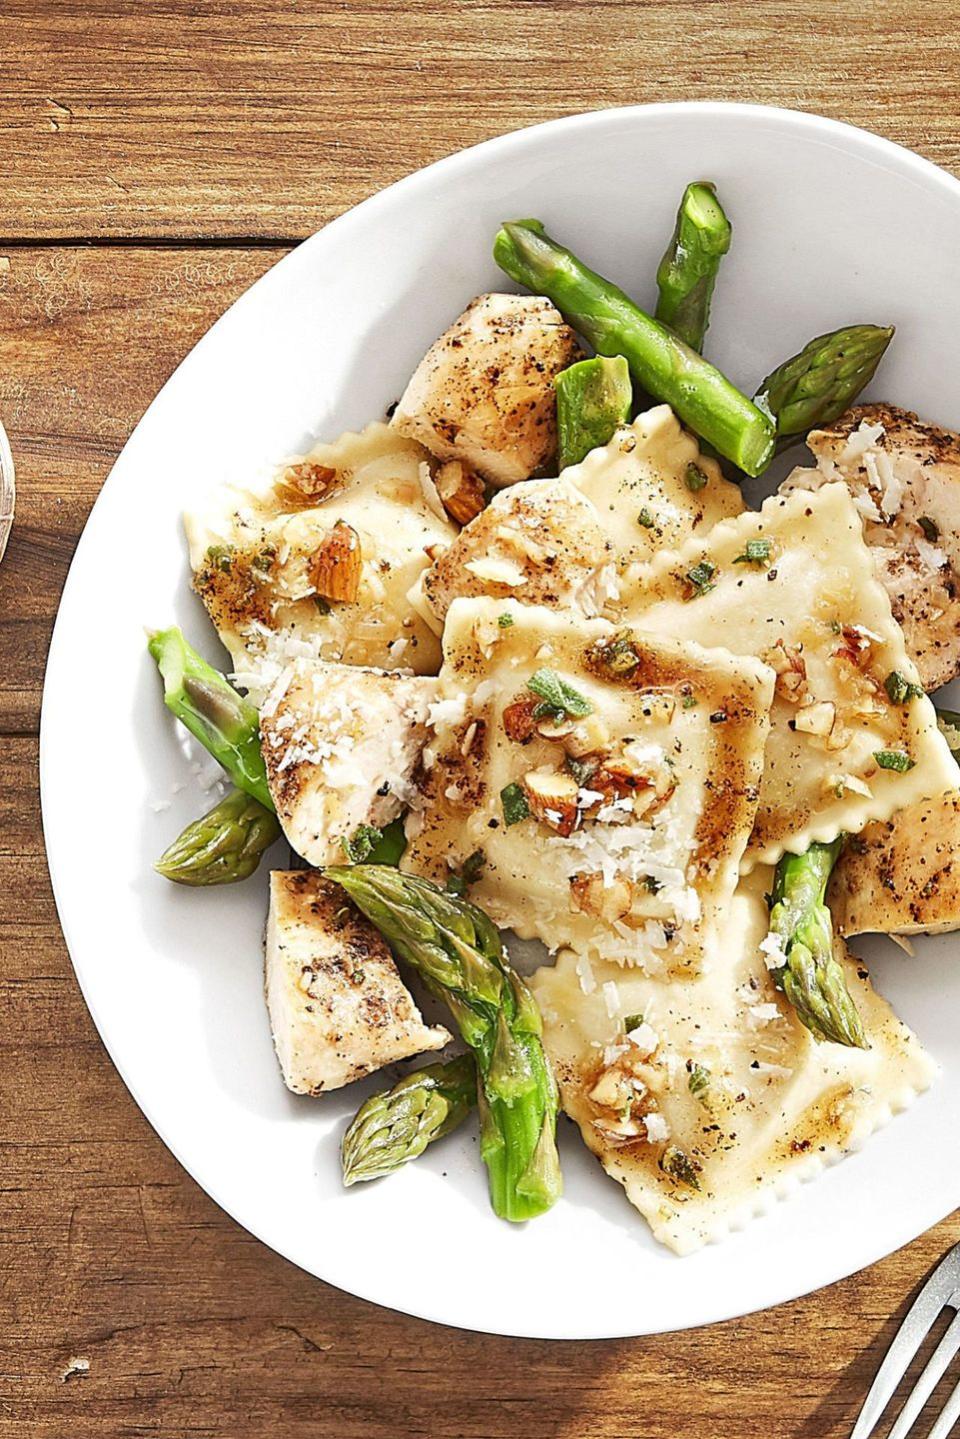 <p>Make store-bought butternut squash ravioli your own by adding asparagus and seared chicken.</p><p><strong><a href="https://www.countryliving.com/food-drinks/recipes/a44277/butternut-squash-ravioli-seared-chicken-recipe/" rel="nofollow noopener" target="_blank" data-ylk="slk:Get the recipe for Butternut Squash Ravioli with Seared Chicken" class="link ">Get the recipe for Butternut Squash Ravioli with Seared Chicken</a>.</strong></p>